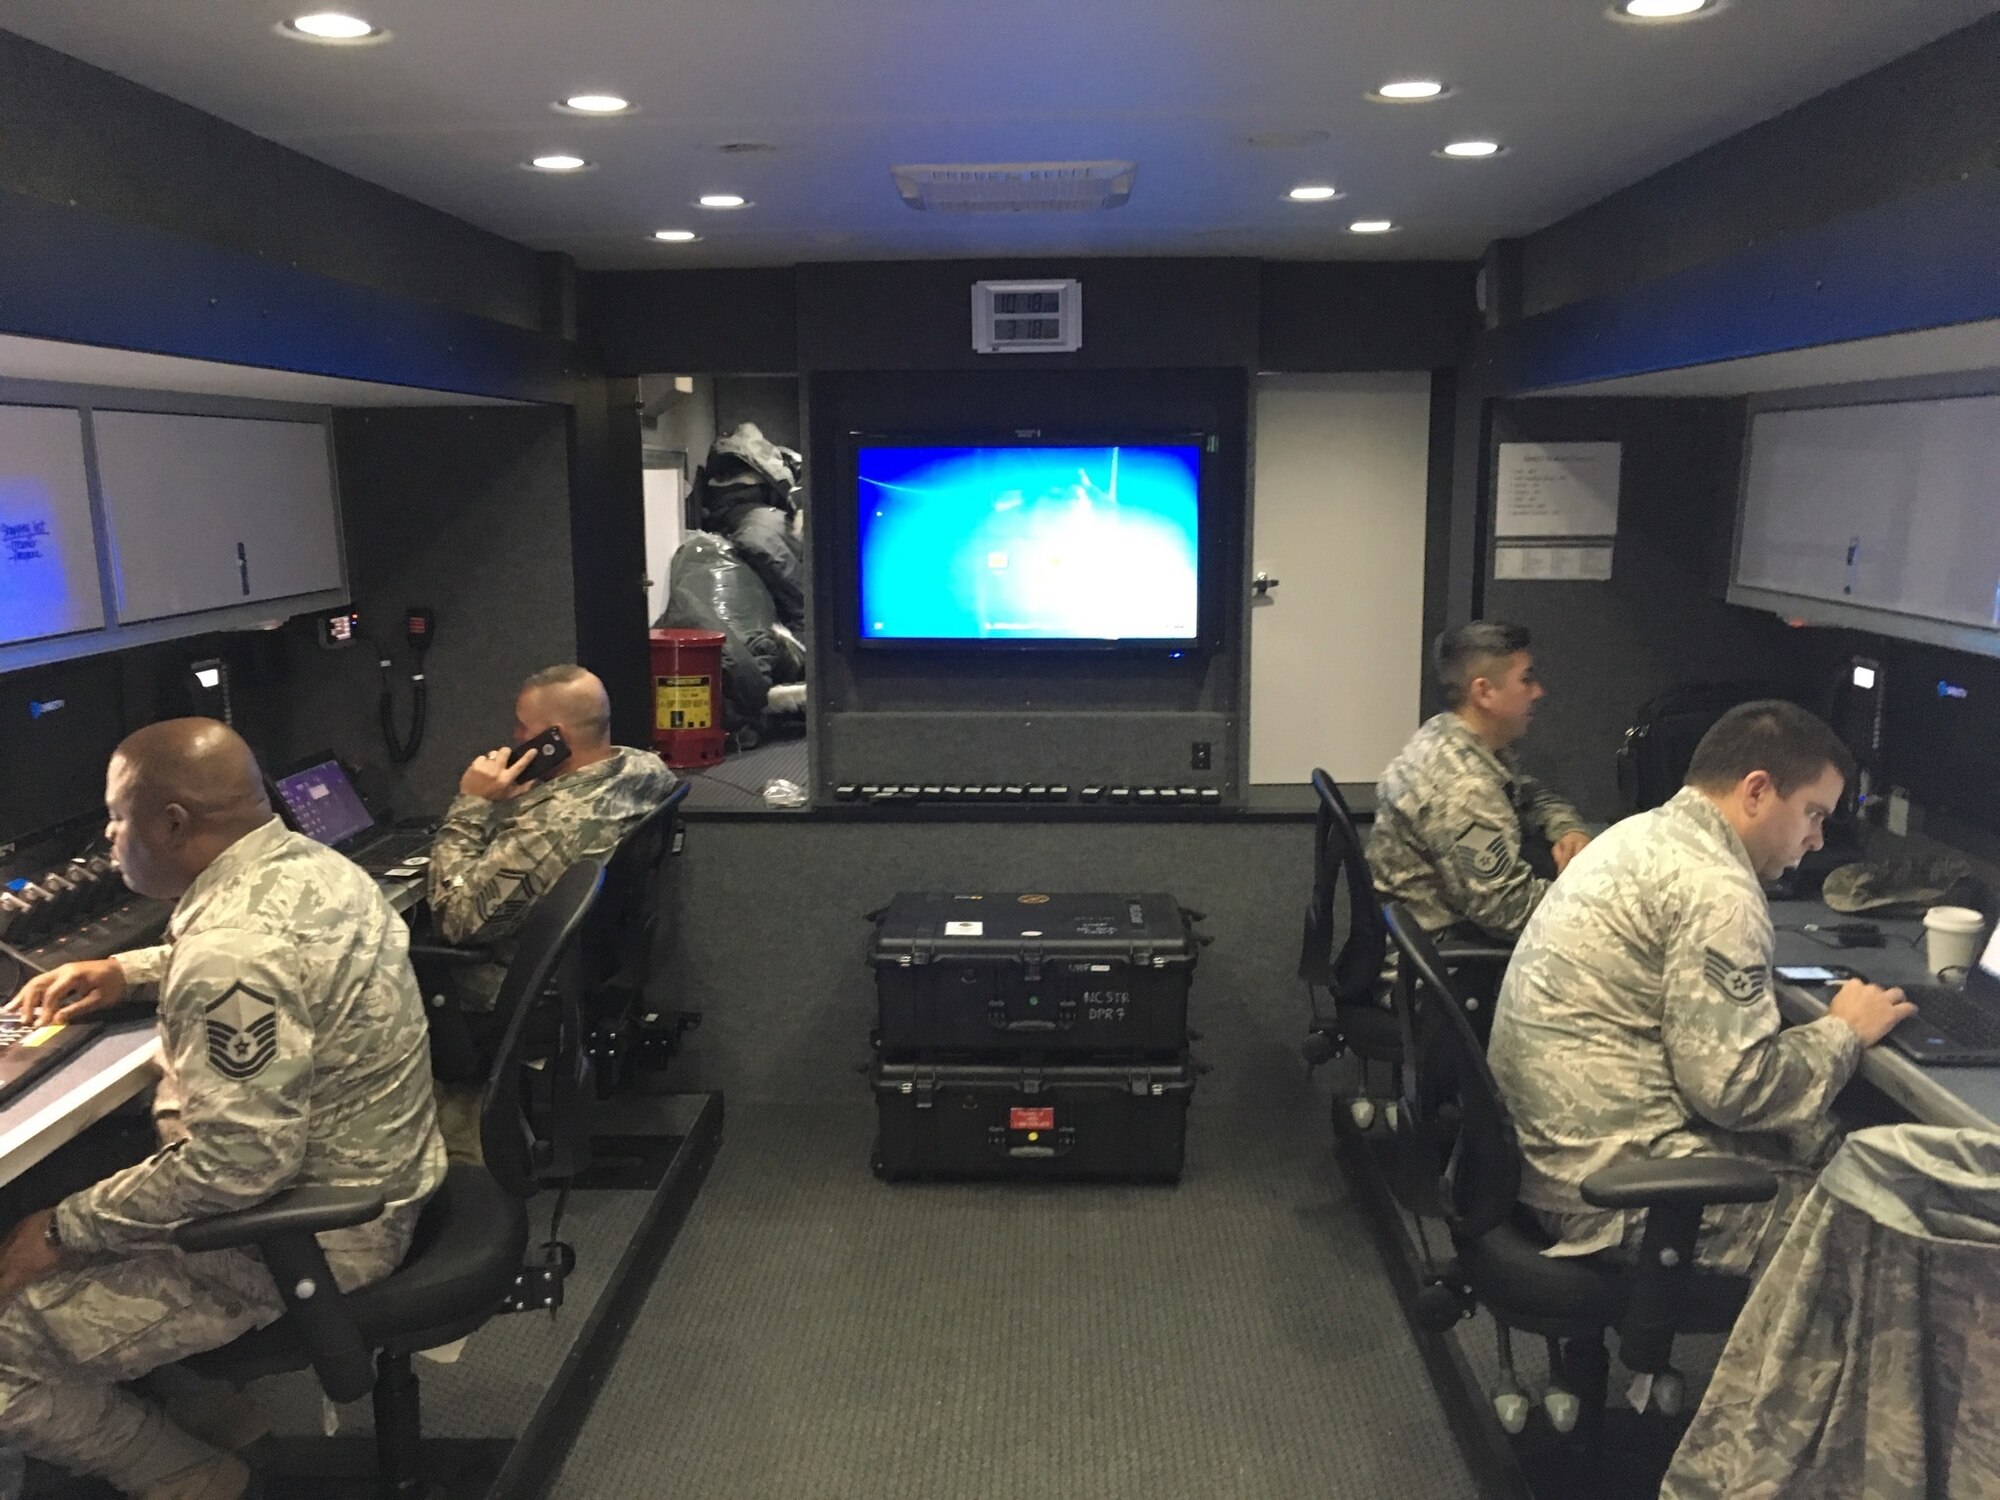 The North Carolina Air National Guard Mobile Emergency Operations Center (MEOC) team works diligently to provide backup communications to three tactical operations centers Task Force Security, Task Force Crowd, and Task Force Access, in Washington D.C., Jan. 19, 2017. The team consists of National Guard Airmen Master Sg.t Rebecca Tongen, Staff Sgt. Mark Fow, Senior Master Sgt. James Cutshaw, Master Sgt. Timothy Jones, Staff Sergeant Benjamin Elliot, Brigadier Gen. Staudenraus, and Master Sgt. Erik Kennedy. About 8000 soldiers and airmen are tasked to support the 58th United States presidential inauguration on Jan. 20, 2017. (U.S. Air National Guard photo credited to Master Sgt. Rebecca S. Tongen)